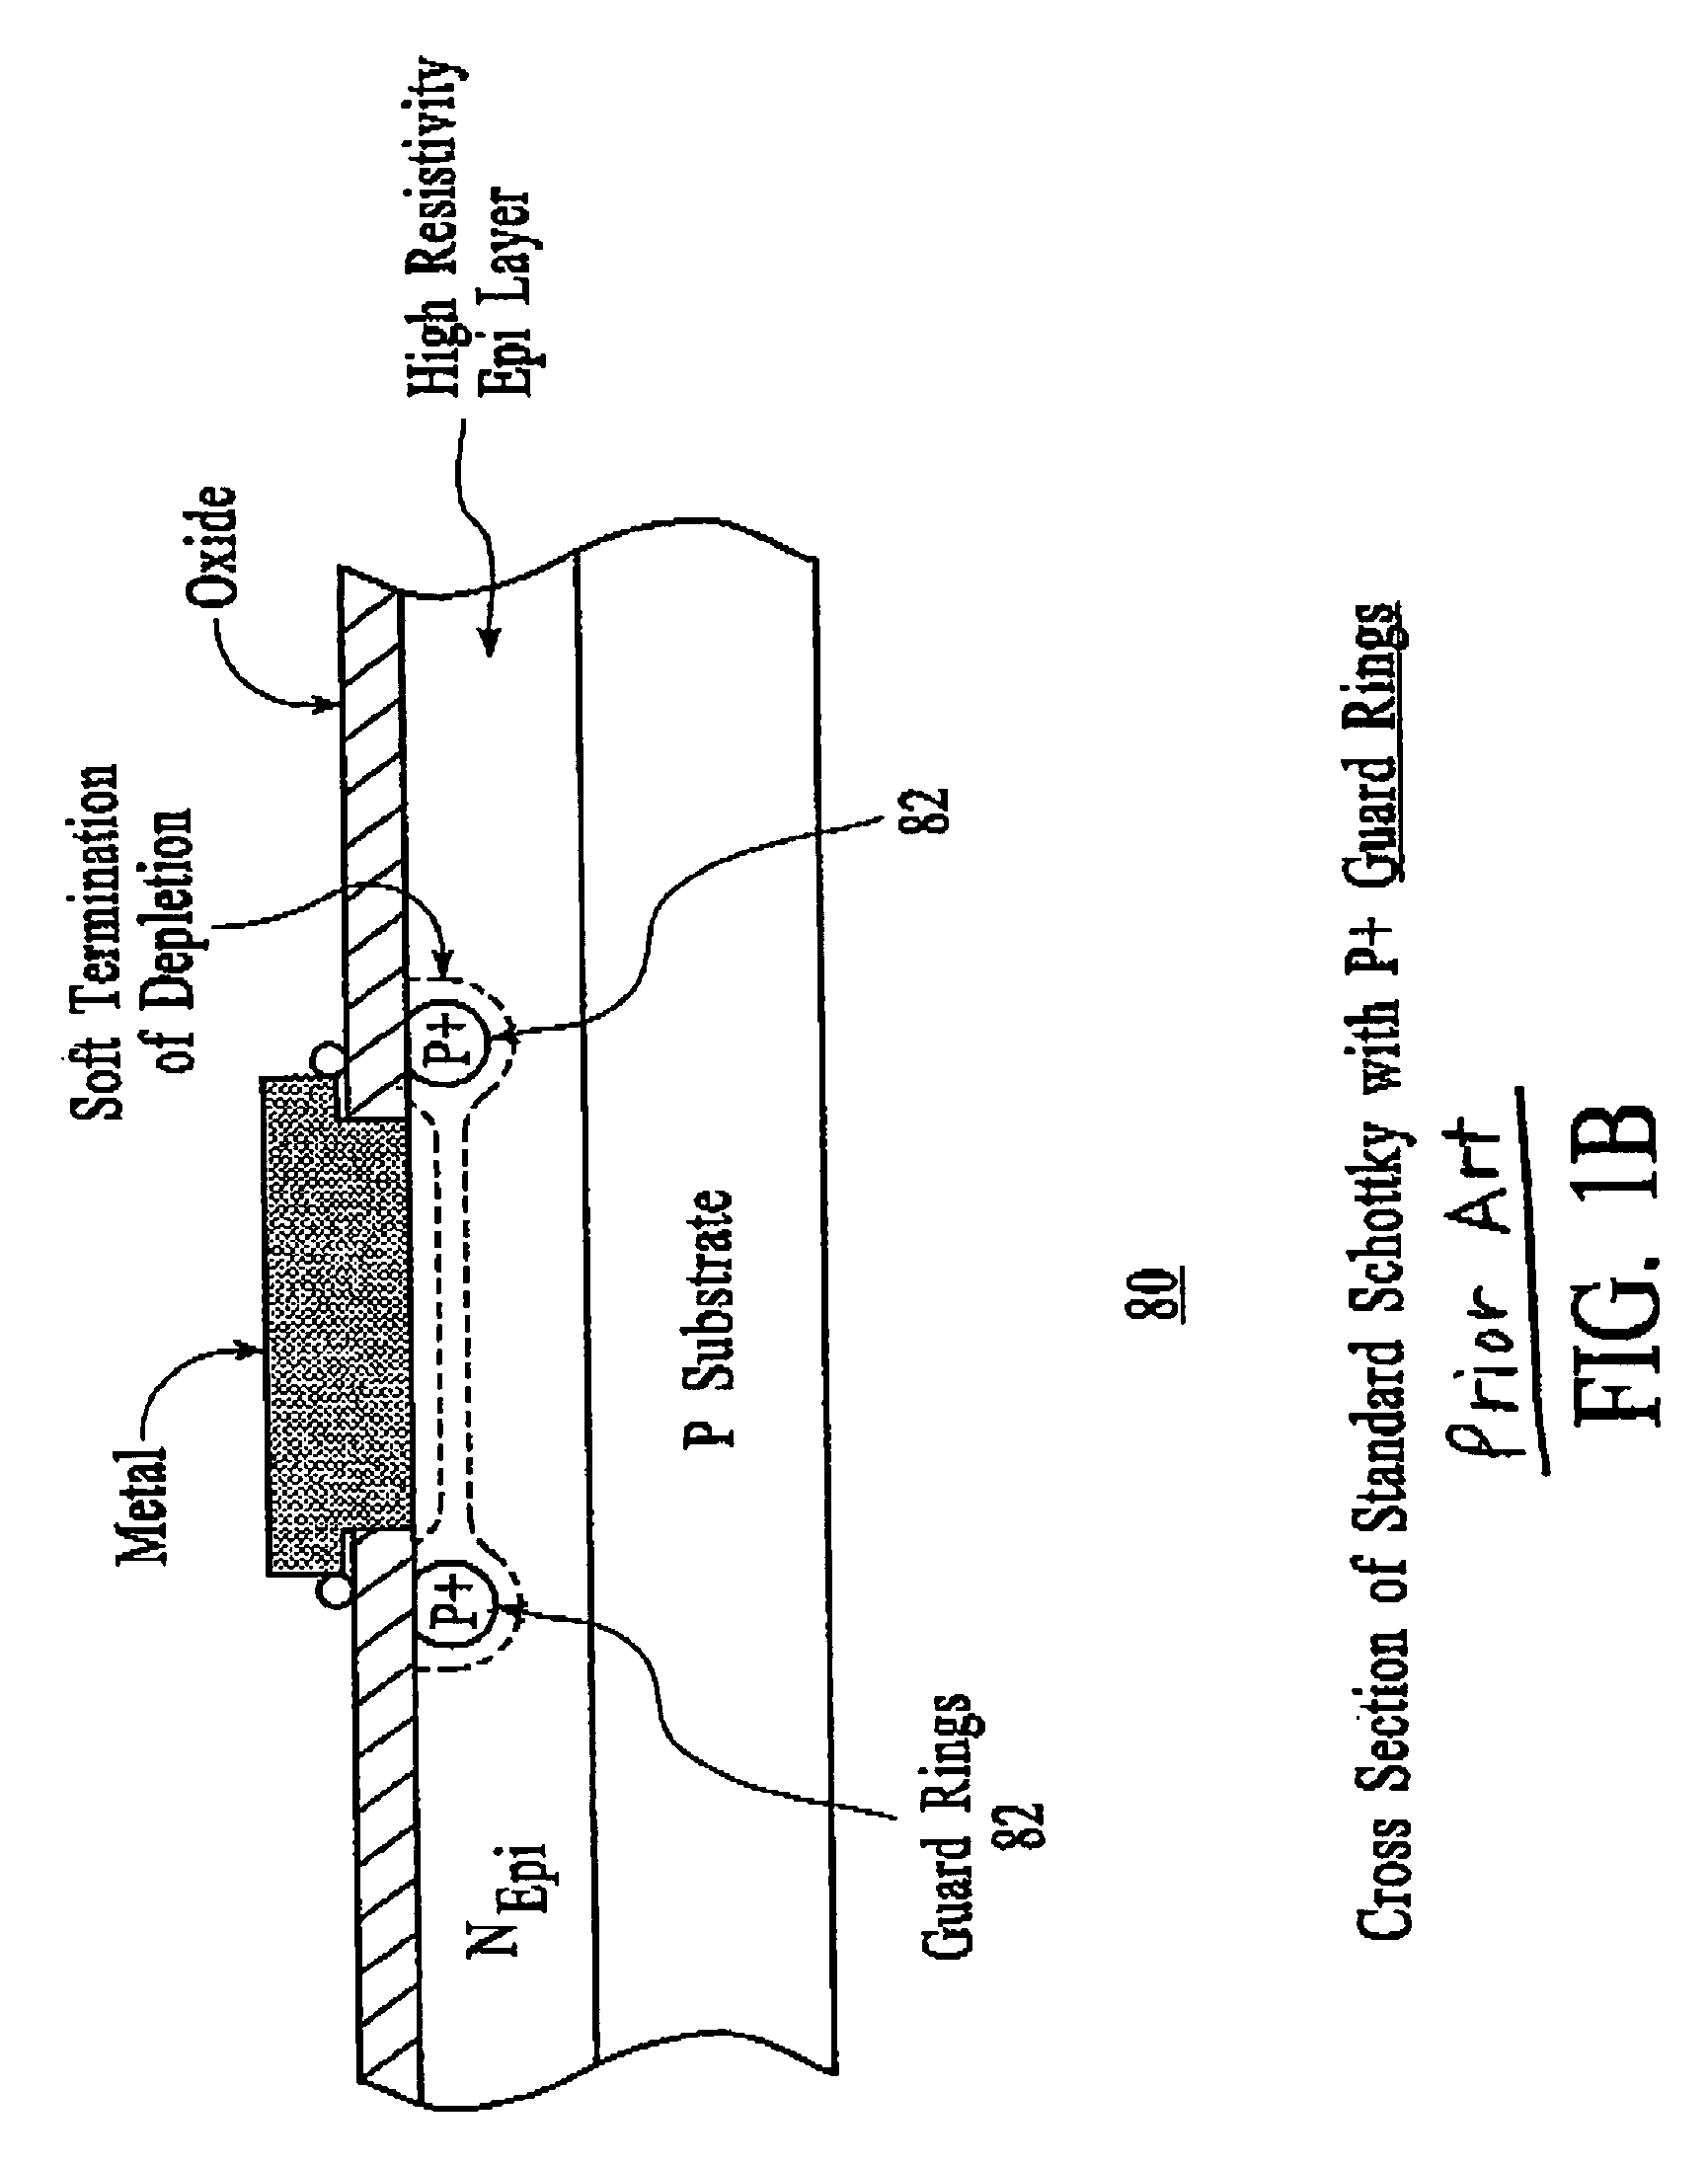 Integrated schottky diode using buried power buss structure and method for making same